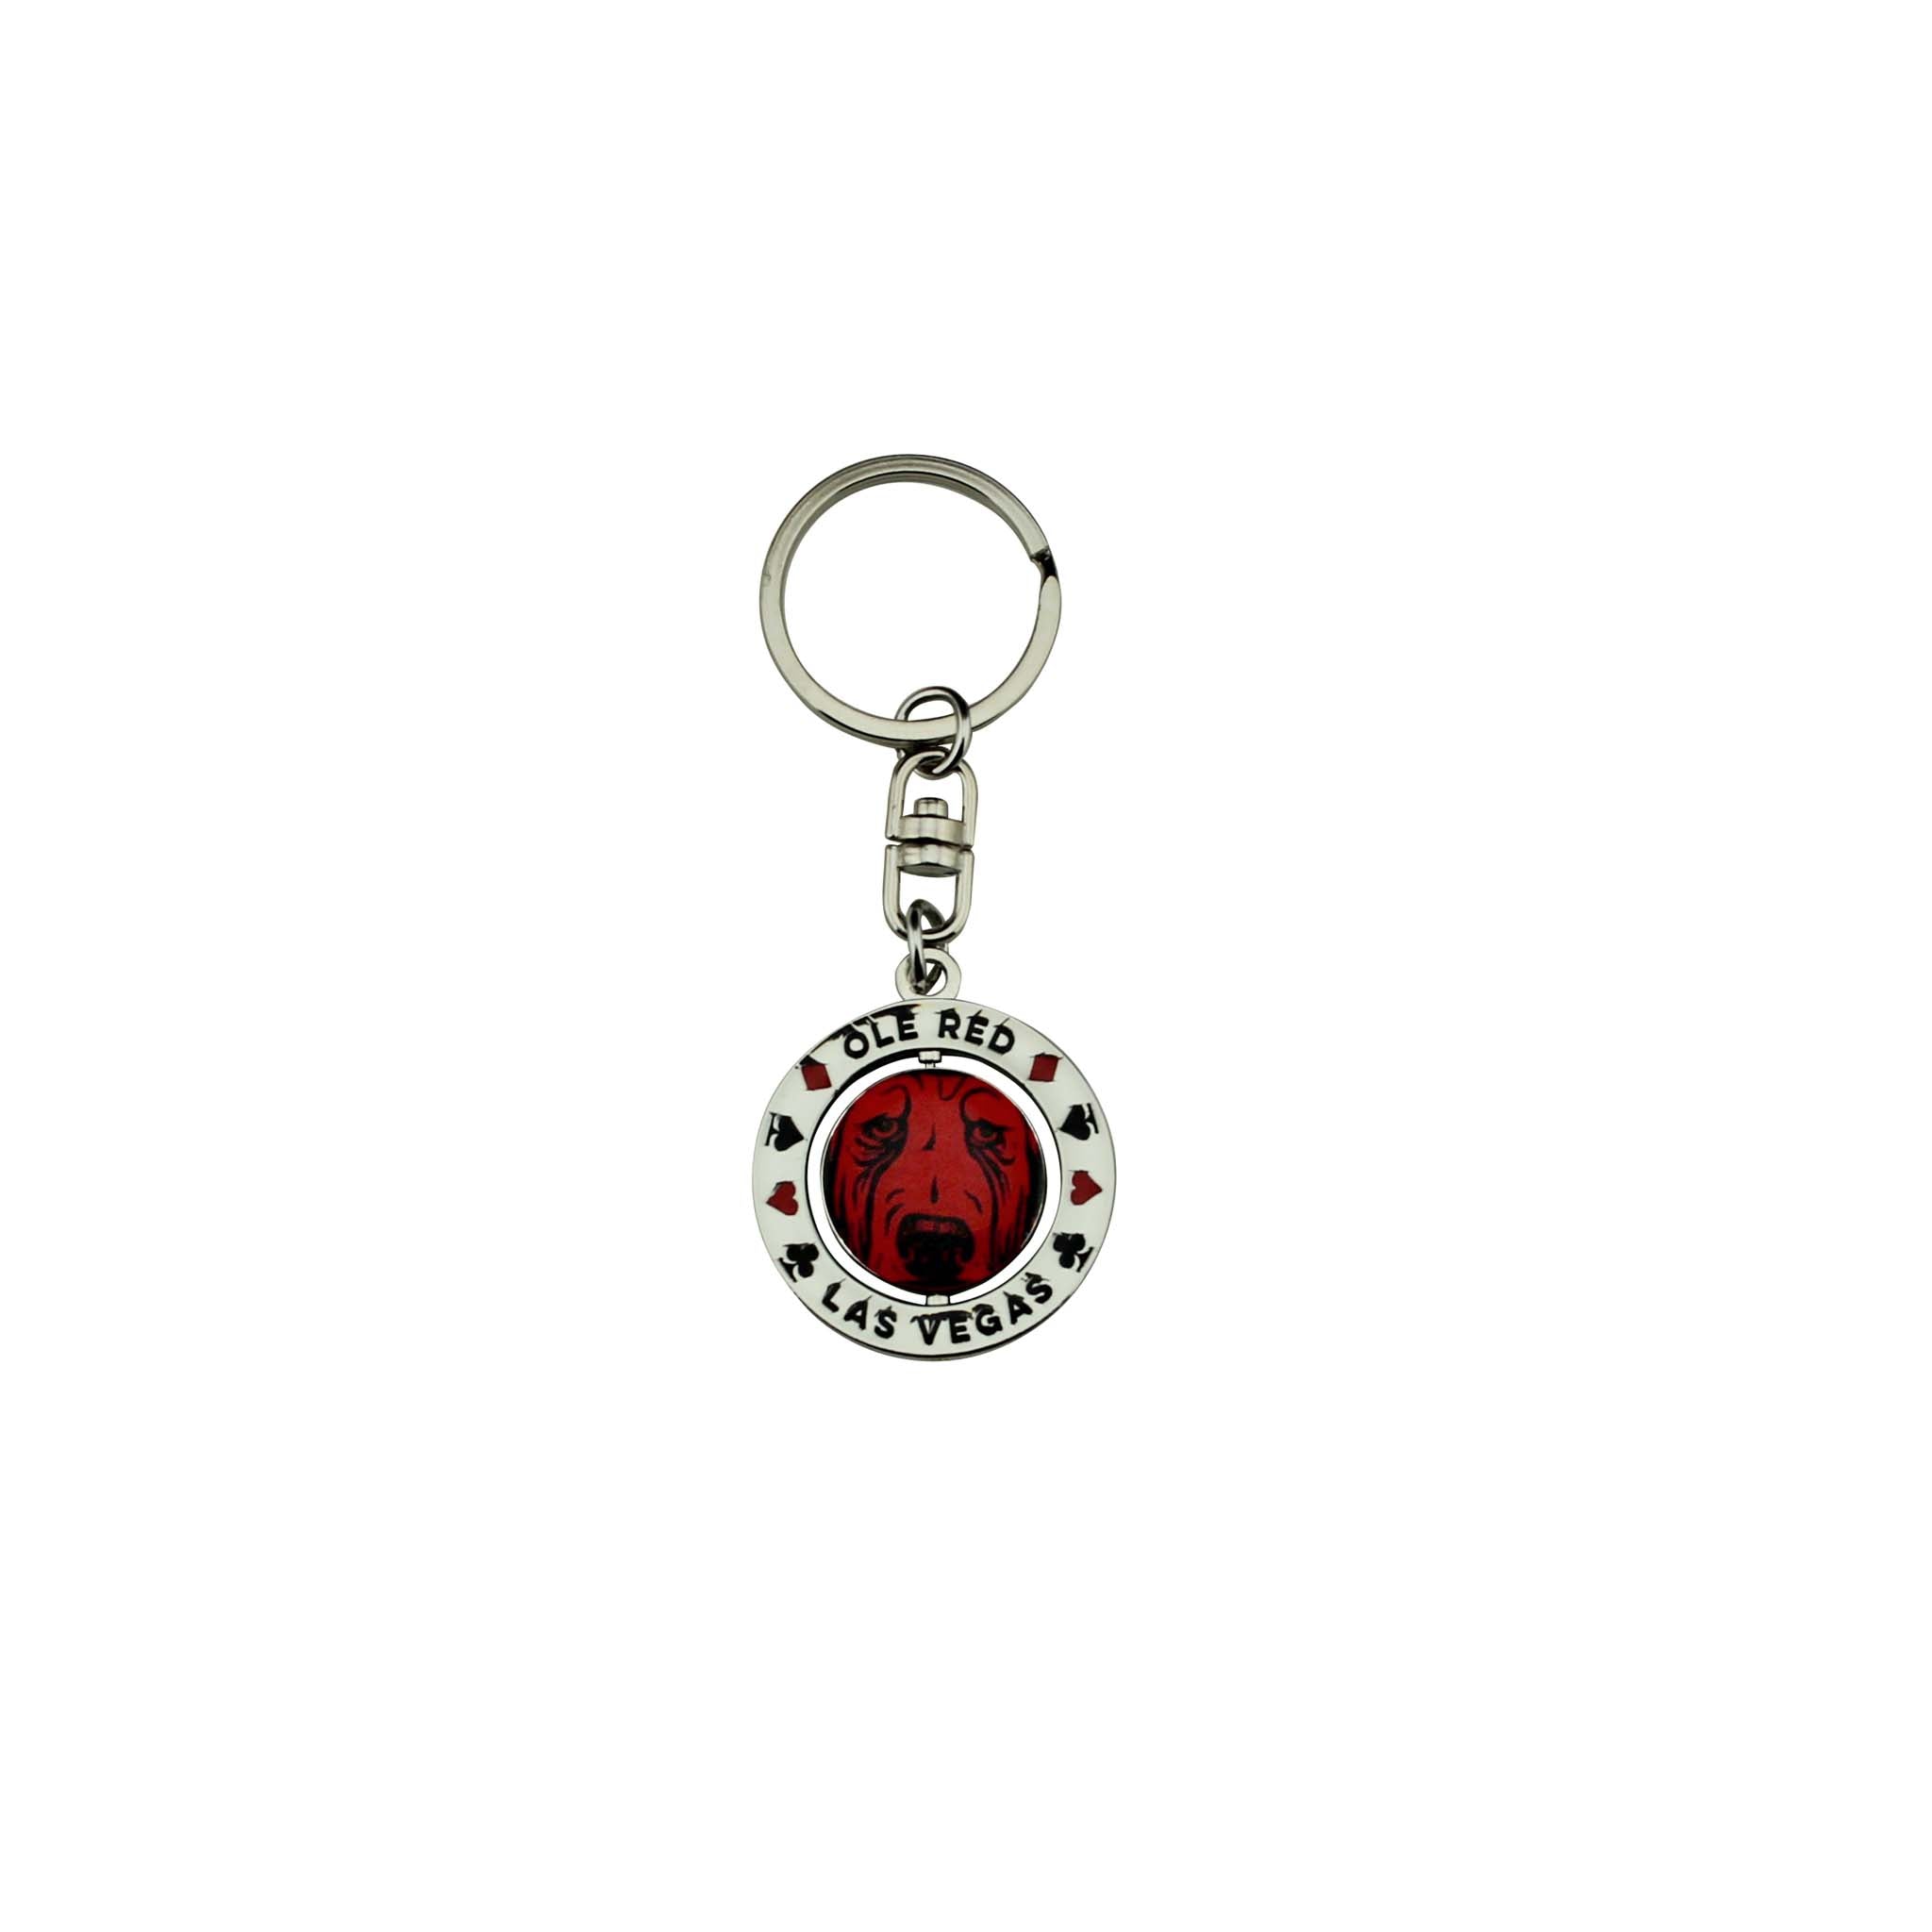 Ole Red Vegas Spinner Suit Keychain